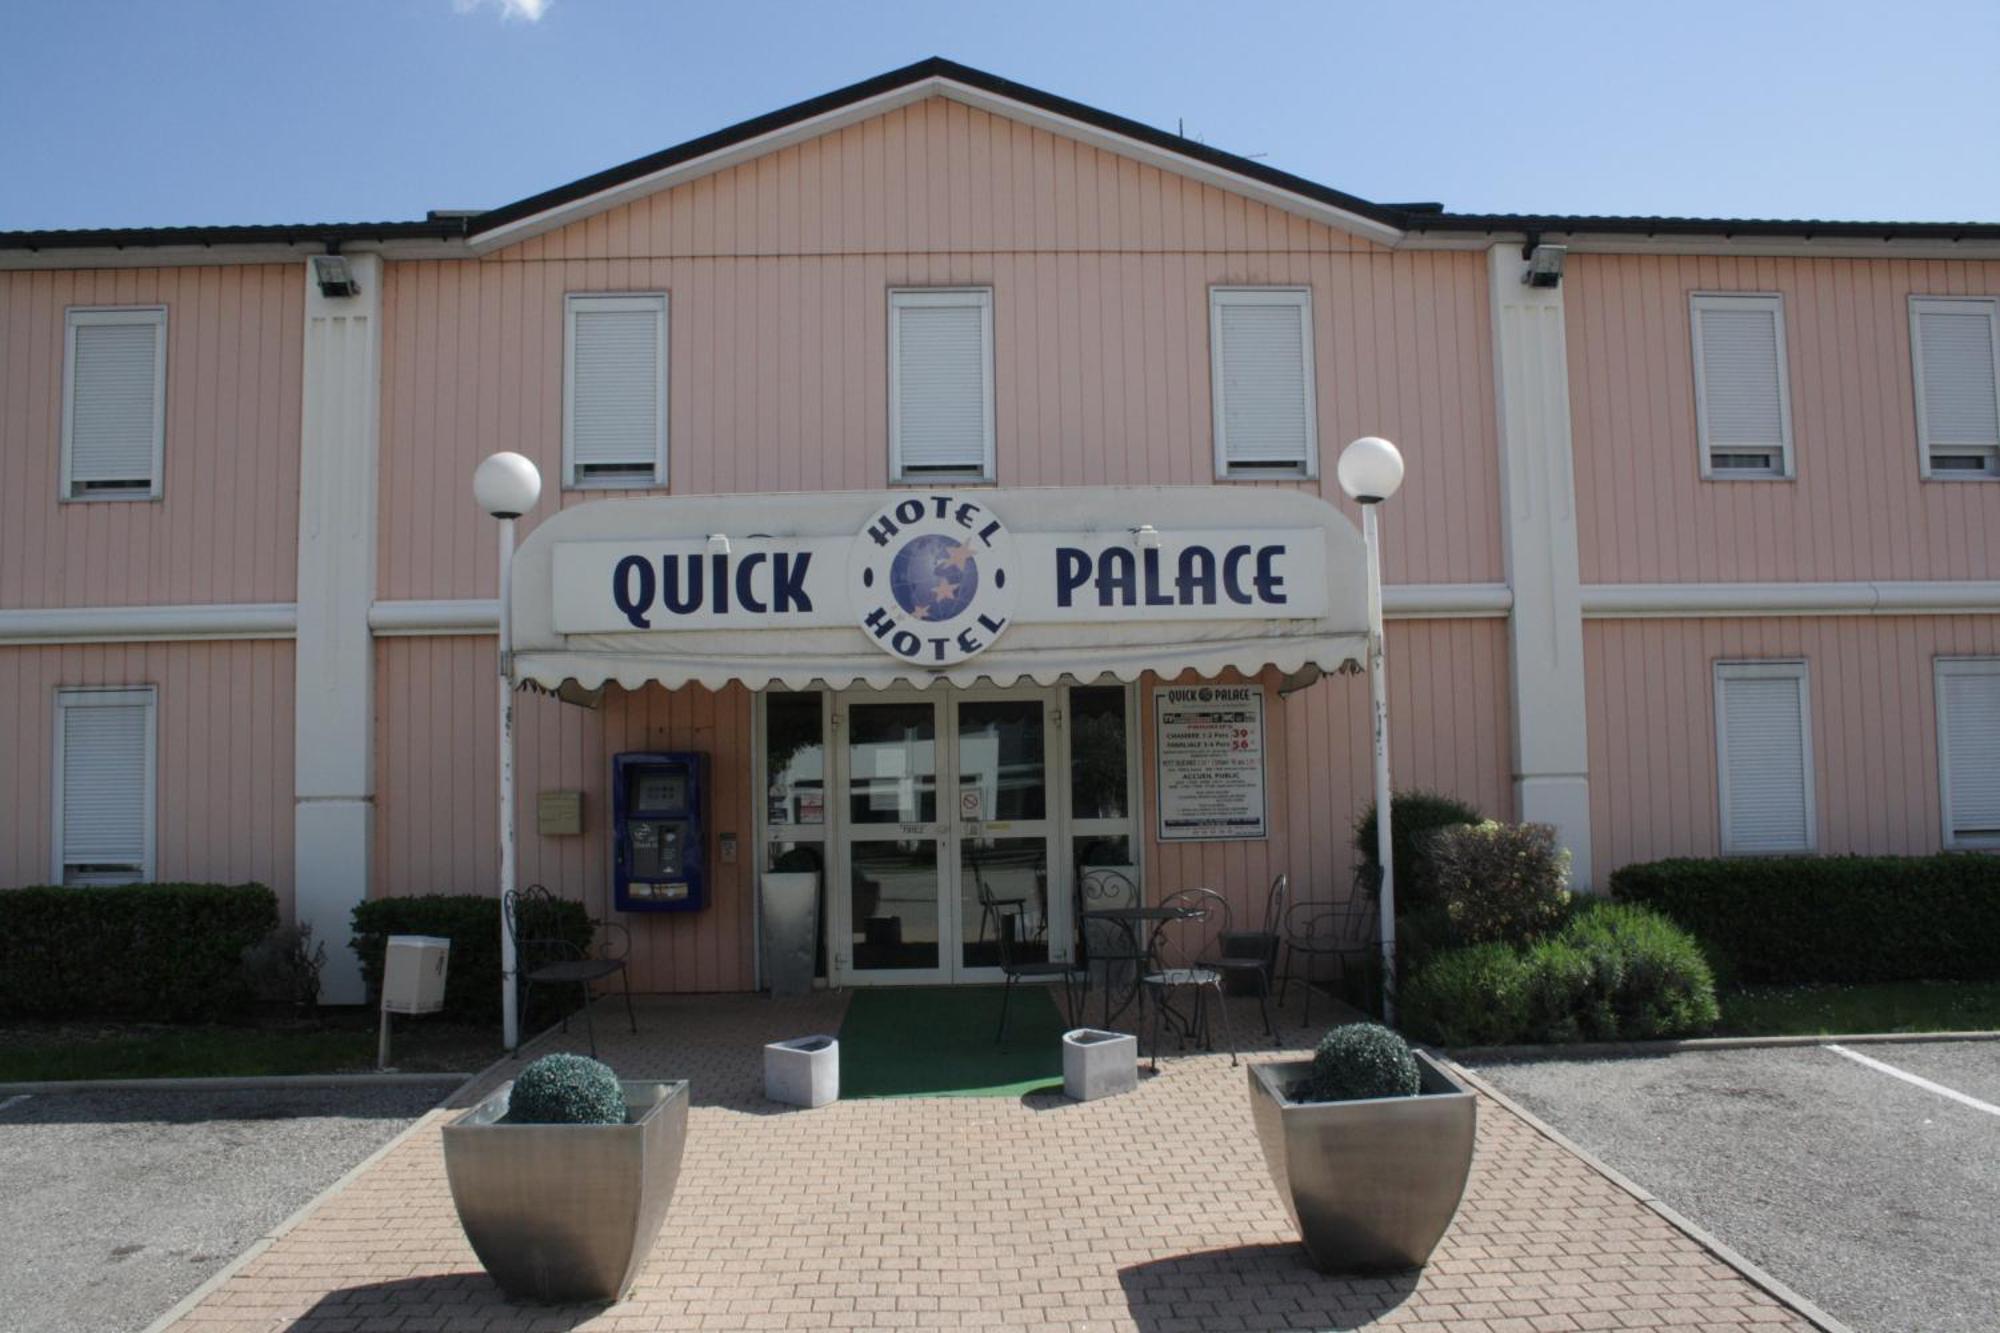 Hotel Quick Palace Valence Nord Bourg-lès-Valence Exterior foto